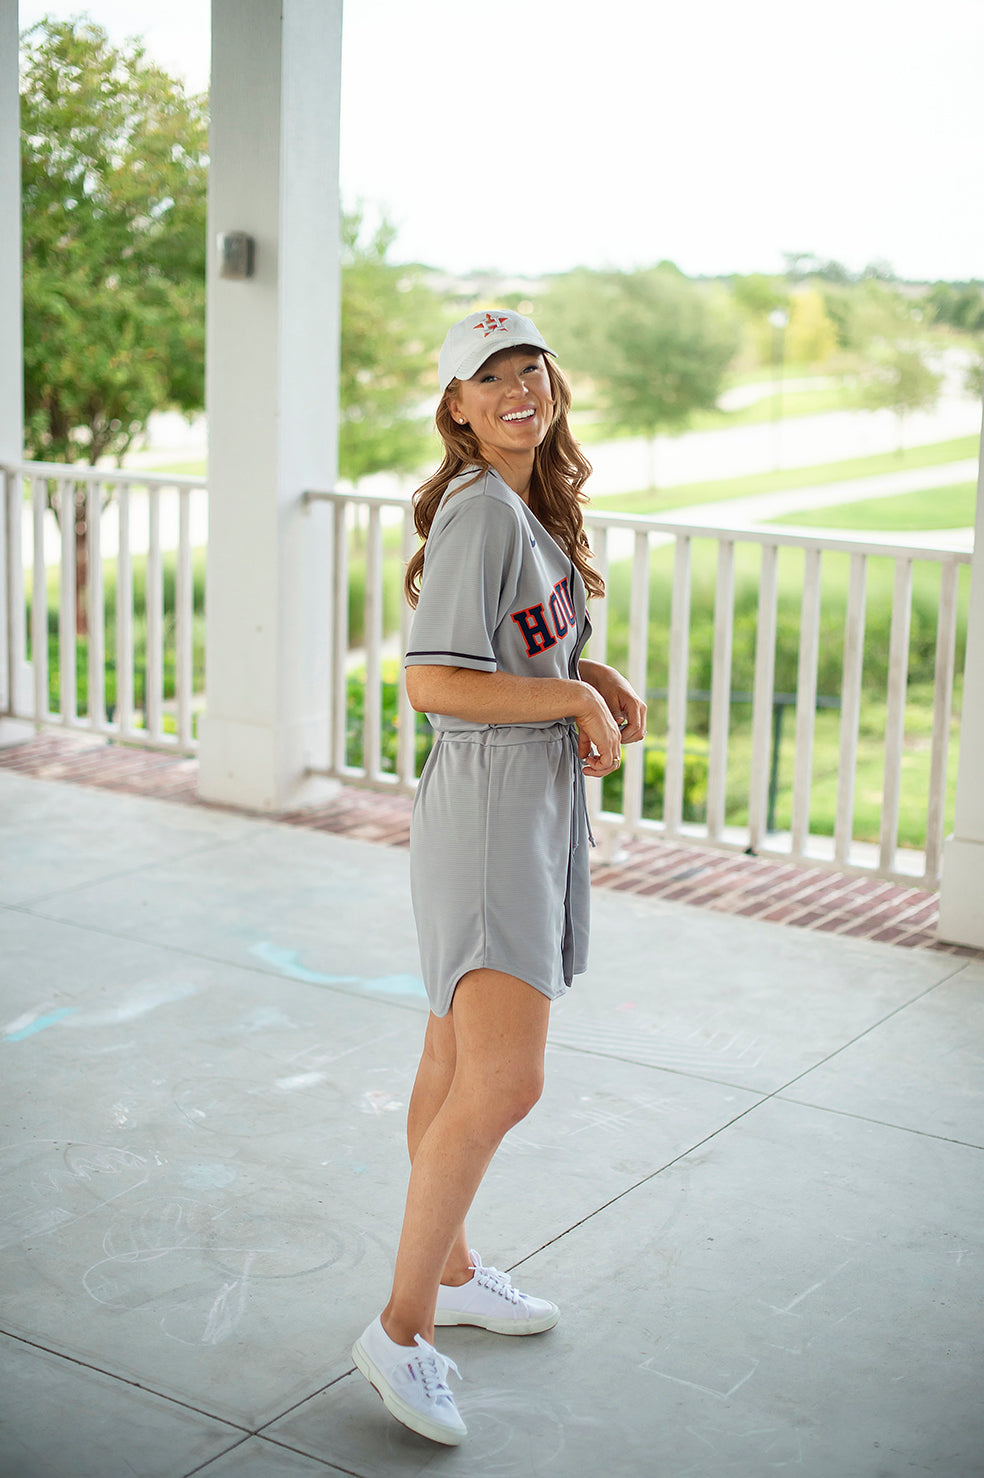 Astros game outfit in 2023  Baseball jersey outfit women